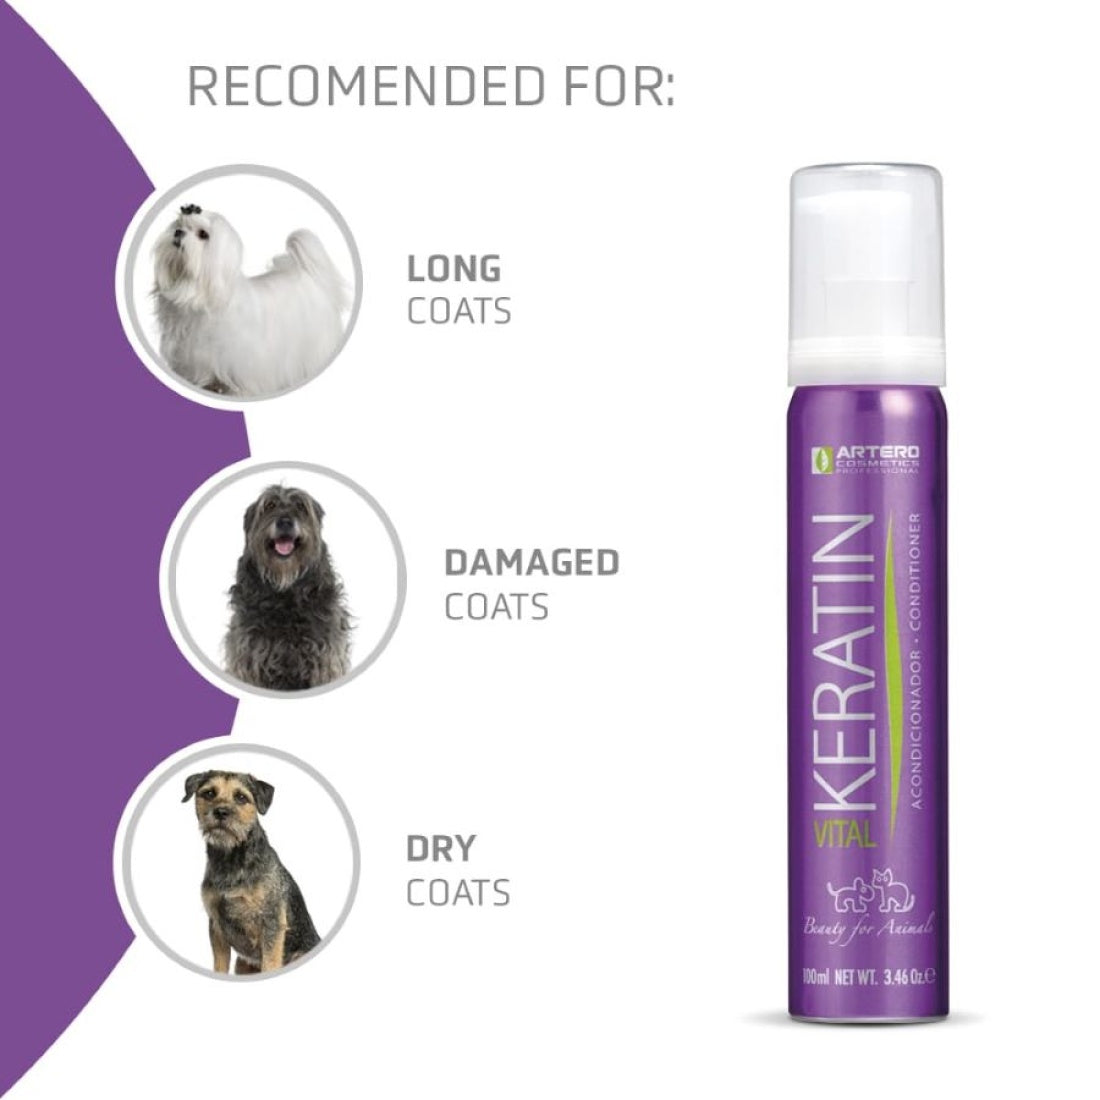 The Artero Keratin Vital Professional Pet Conditioner is scientifically formulated to repair and fortify dry, weakened and damaged coats by locking in moisture and enhances elasticity, restoring natural volume and manageability while reducing split-ends, frizz and static electricity during brushing.